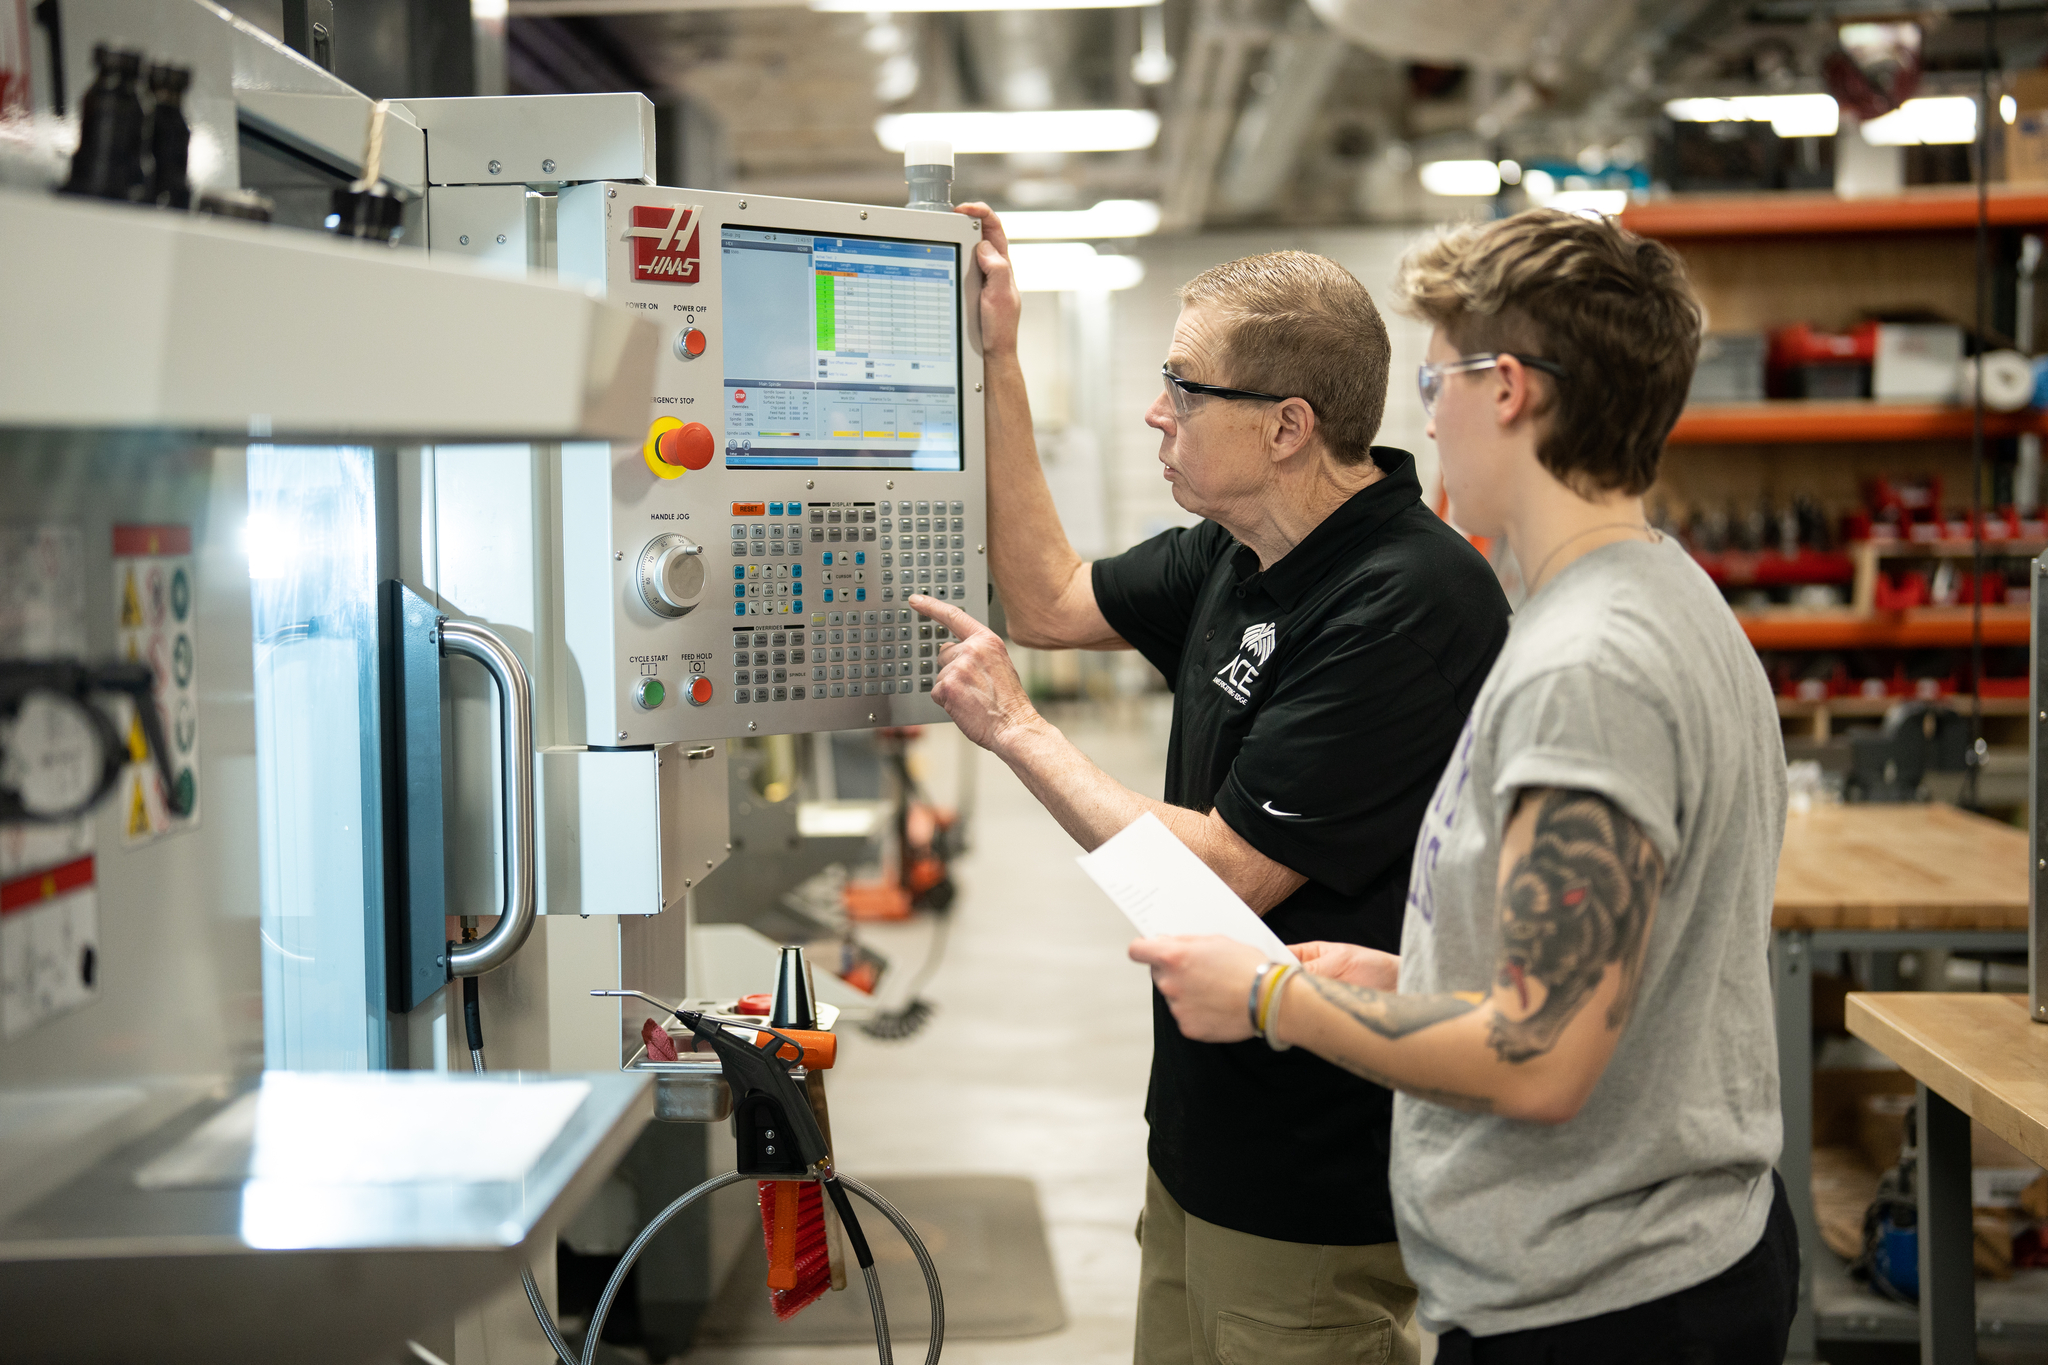 School of Engineering faculty and students work on CNC equipment